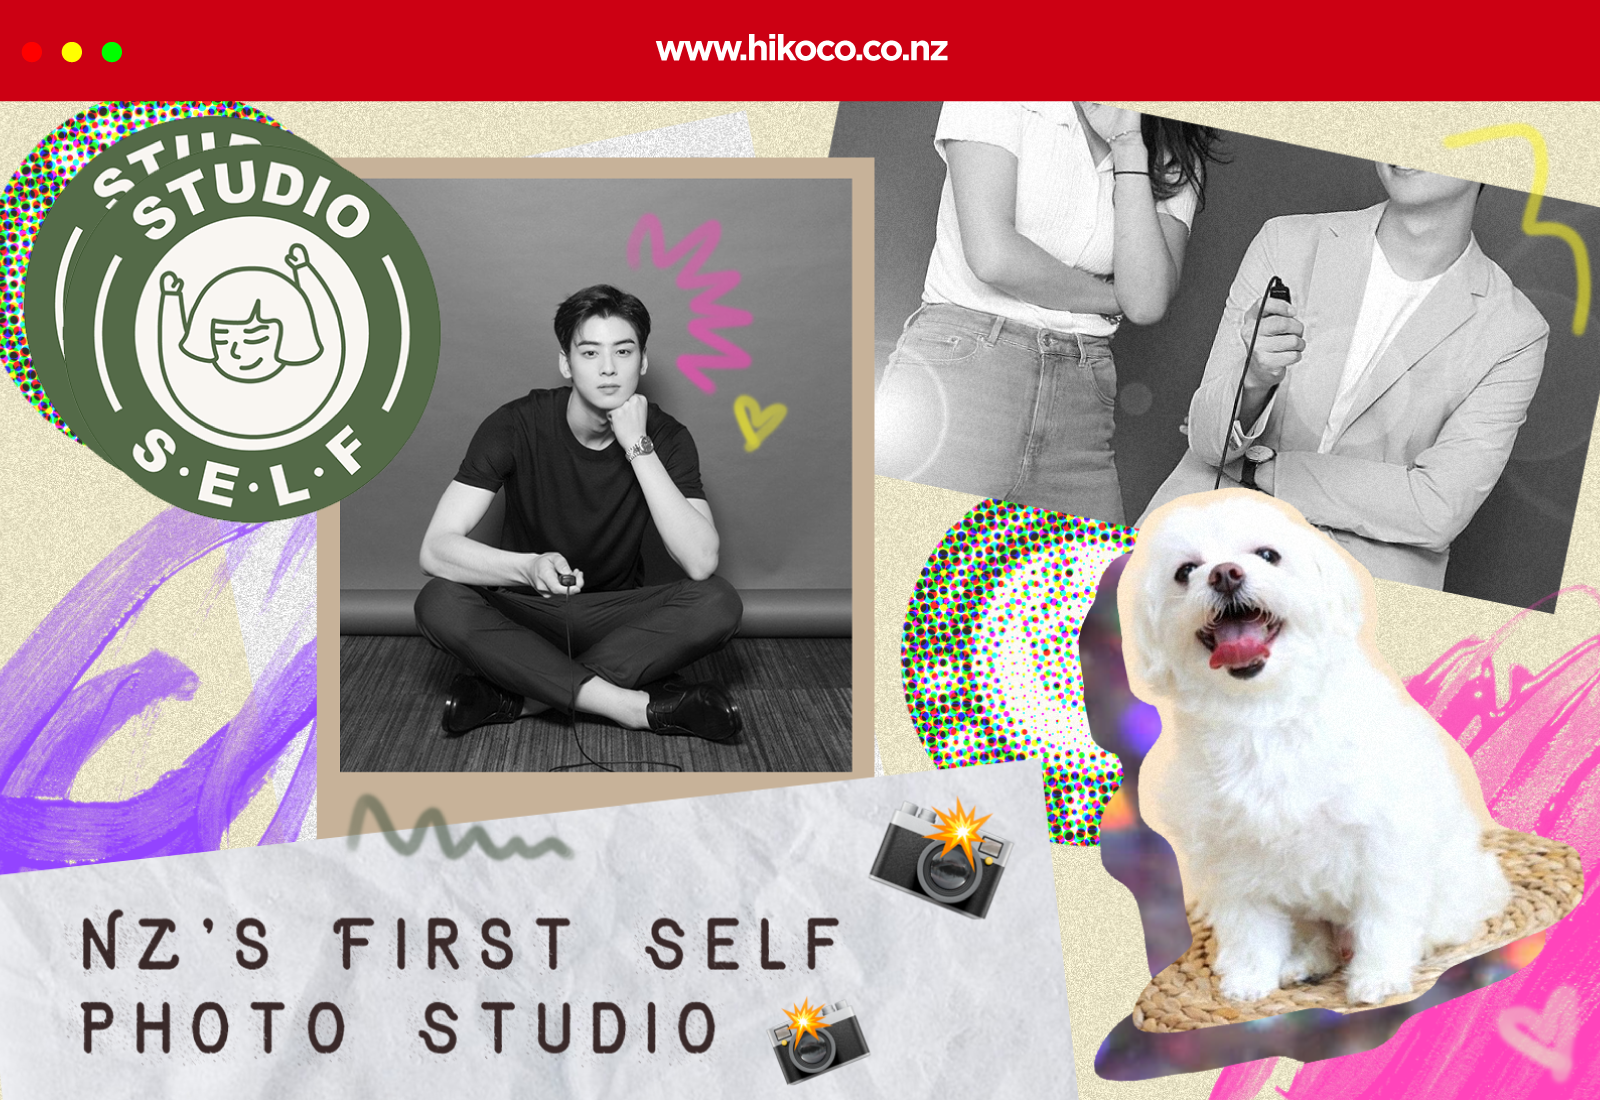 Come Take Your Picture (Literally) at NZ’s First Self Studio 📸